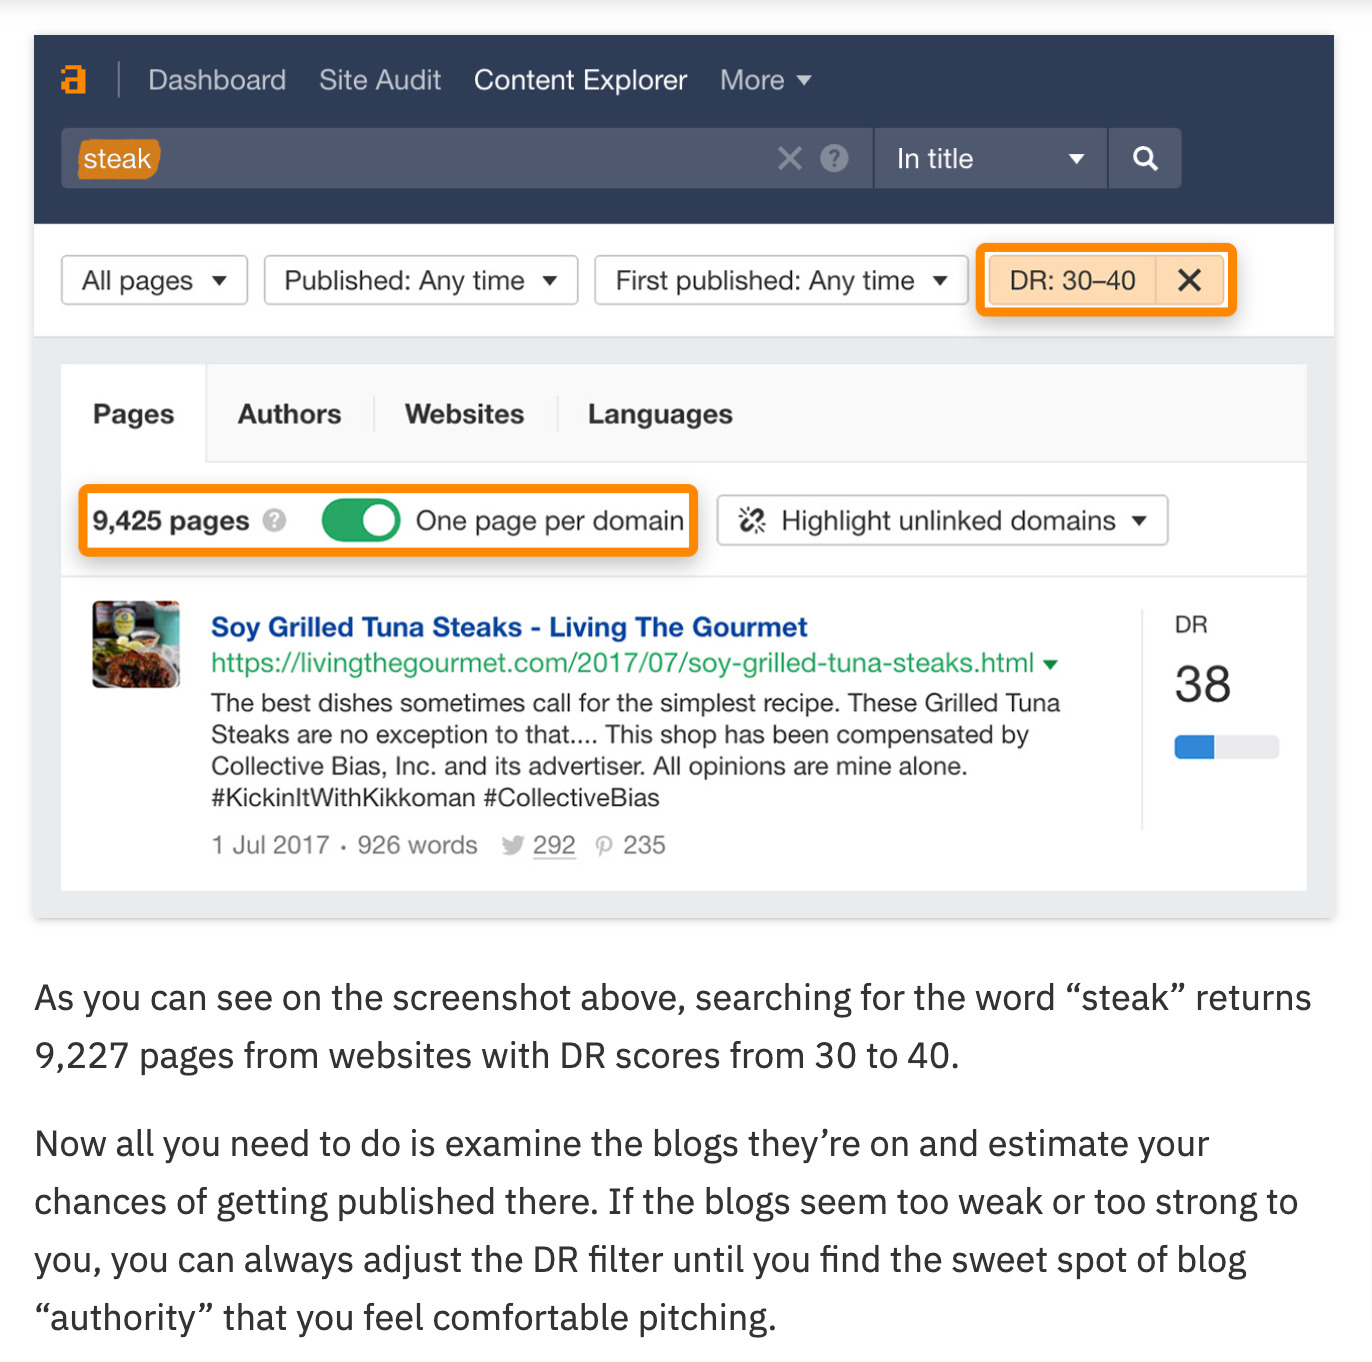 Excerpt of an Ahrefs blog article talking about Content Explorer 